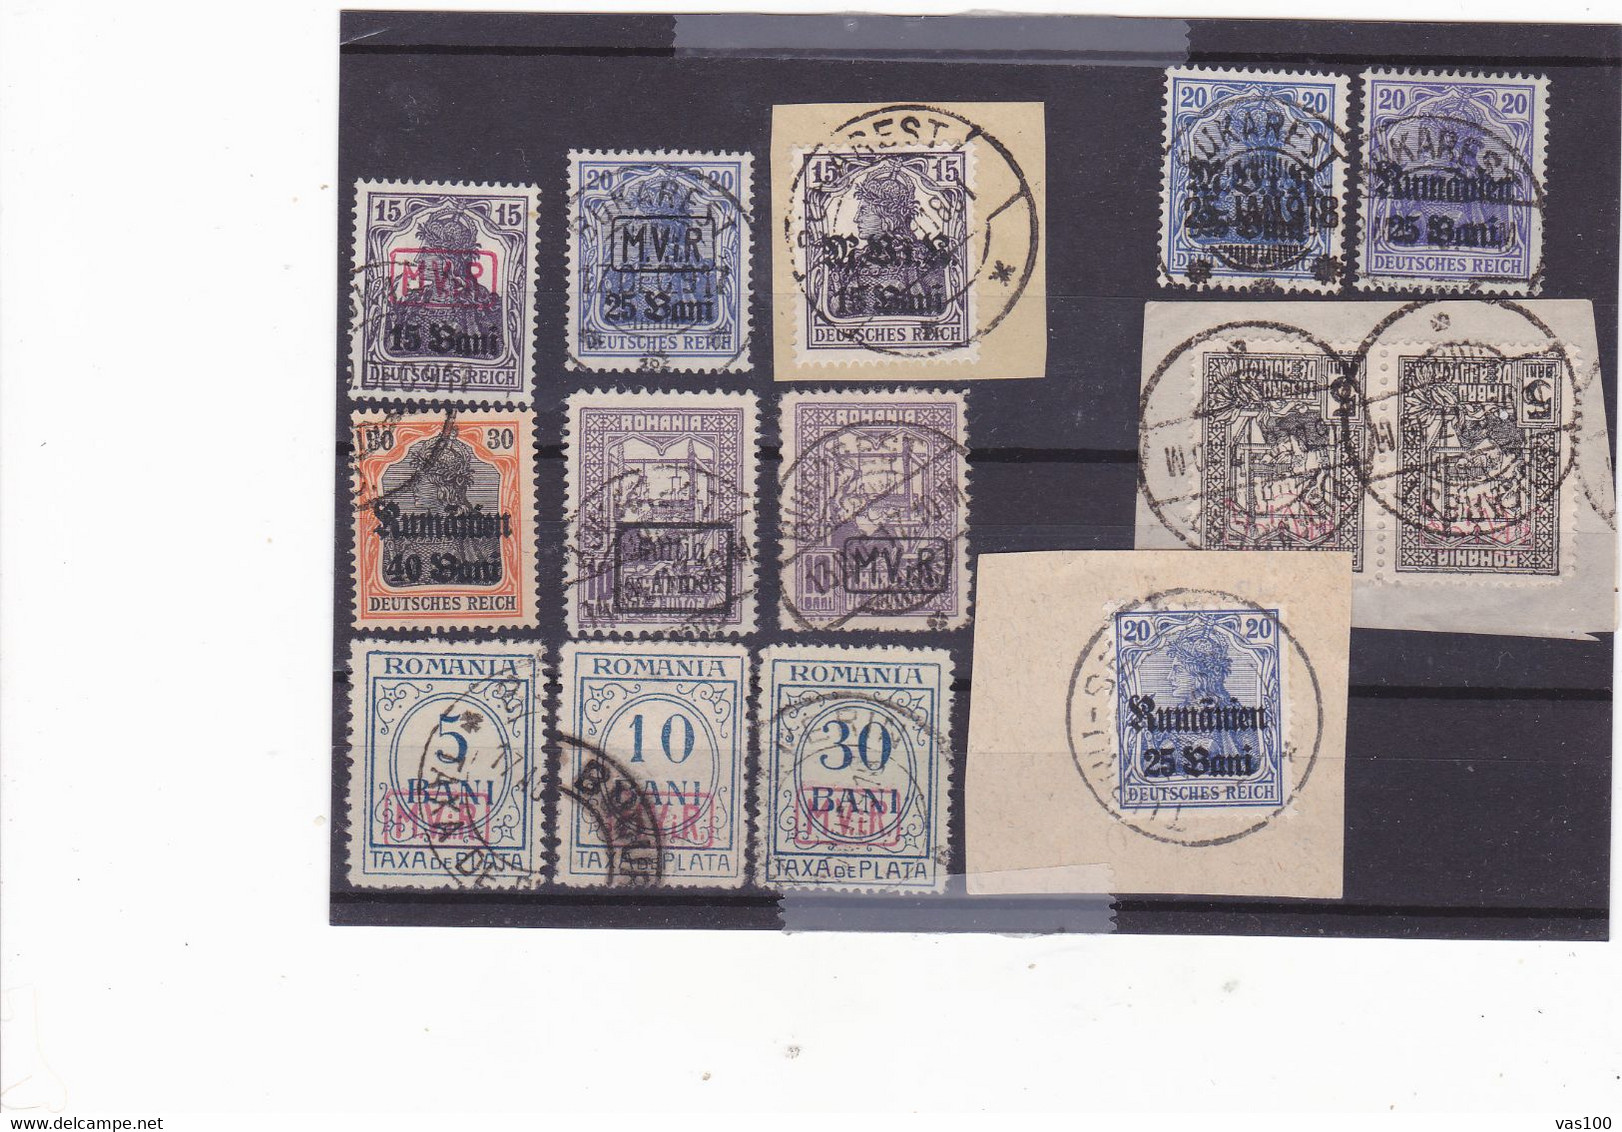 Germany Occupation Romania In WWI 1917-8 OVERPRINT LOT14 STAMPS - Occupazione